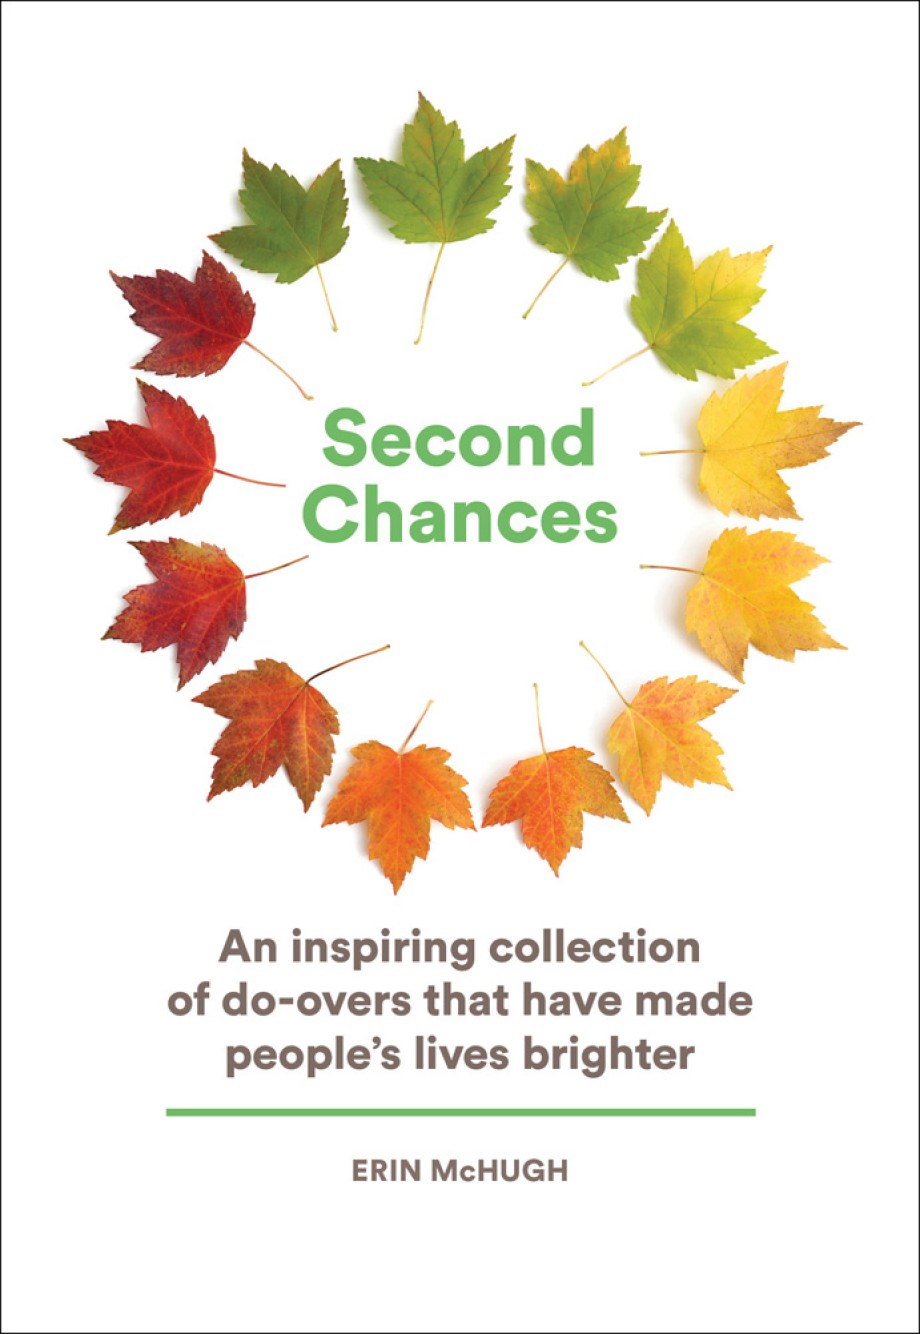 Second Chances An Inspiring Collection of Do-Overs That Have Made People's Lives Brighter